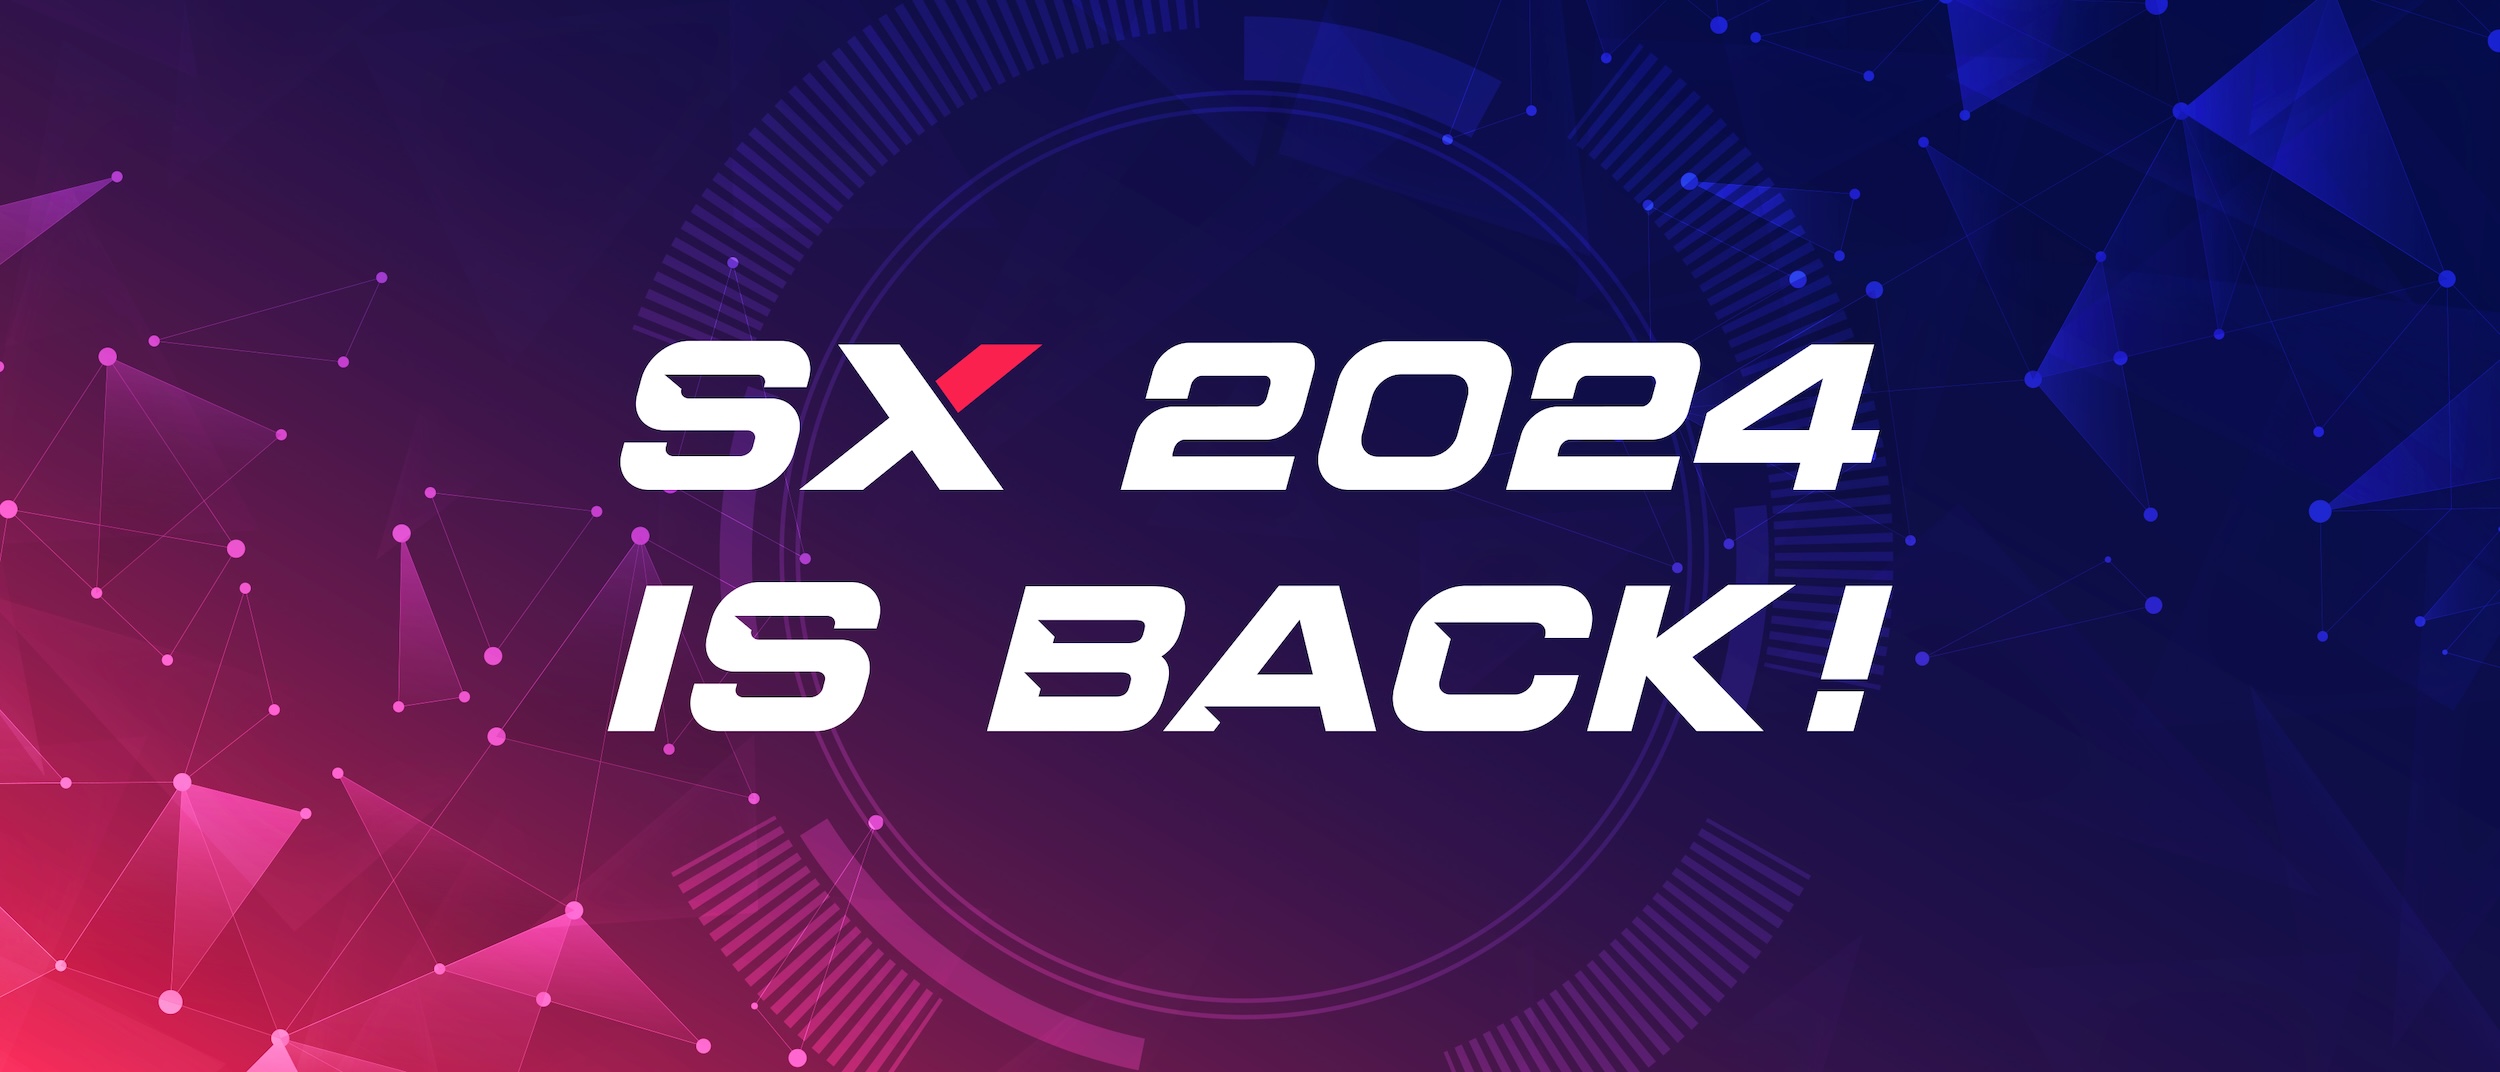 SX 2024 is back!